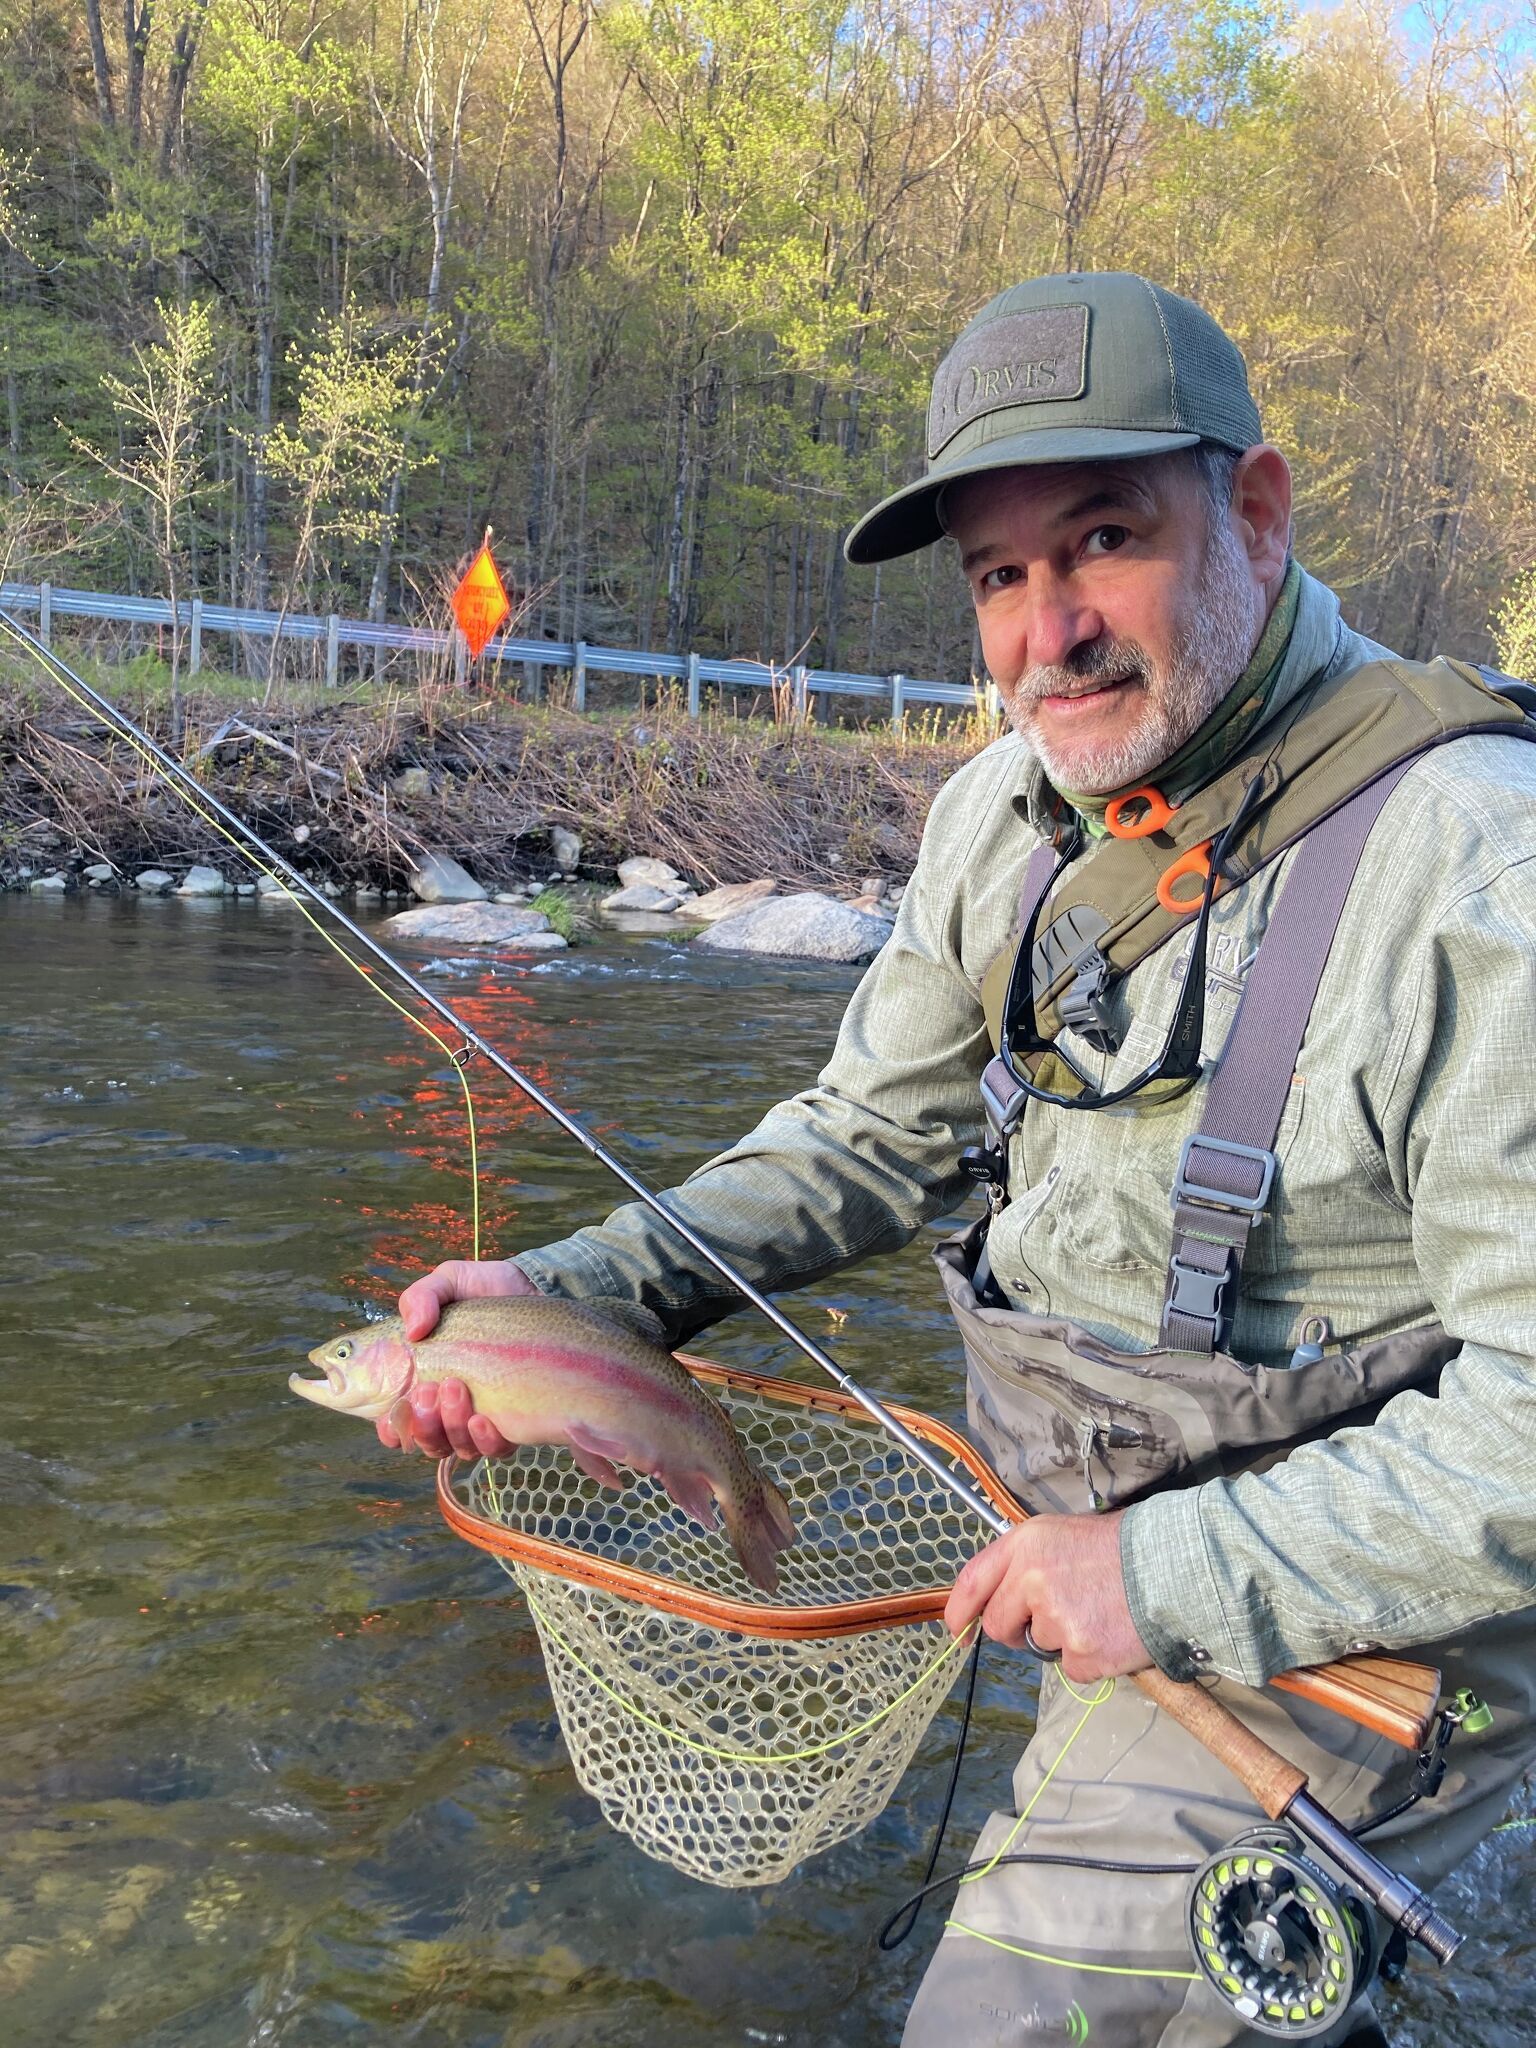 CT's Housatonic River: From polluted history to fishing destination